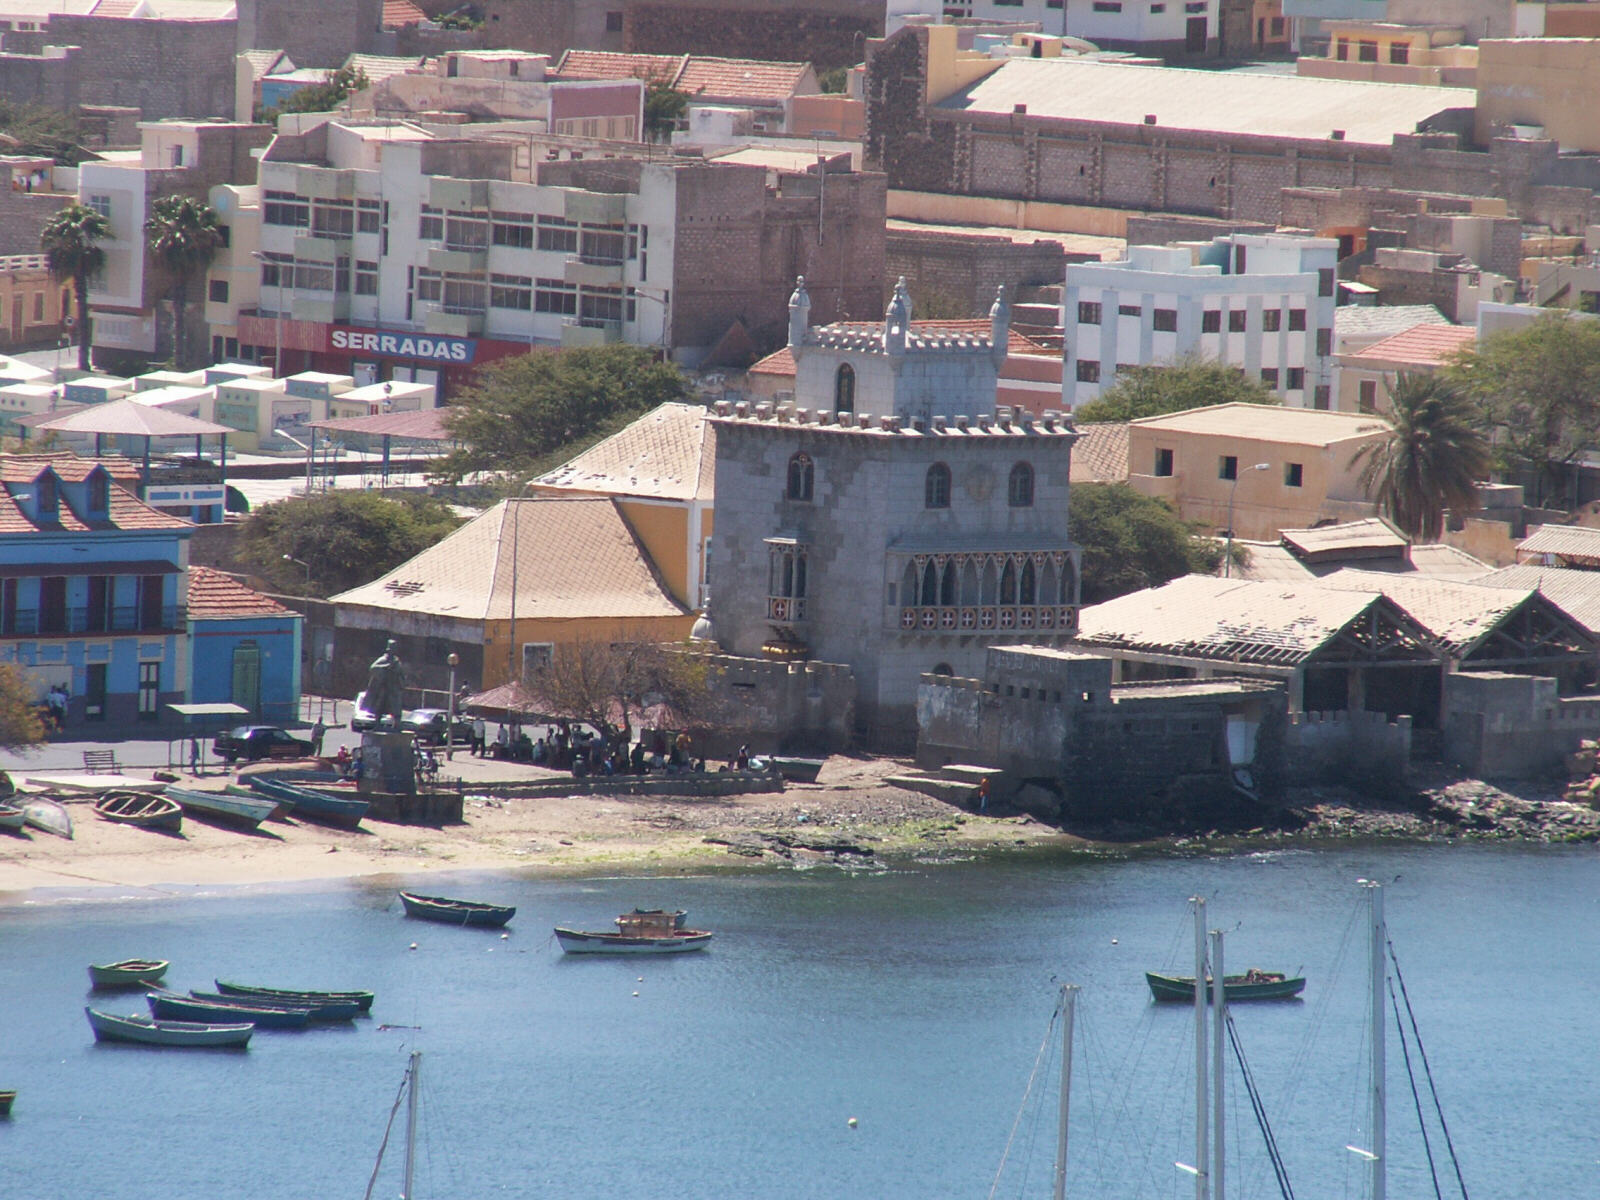 Belem Tower by the harbour in Mindelo, Cape Verde